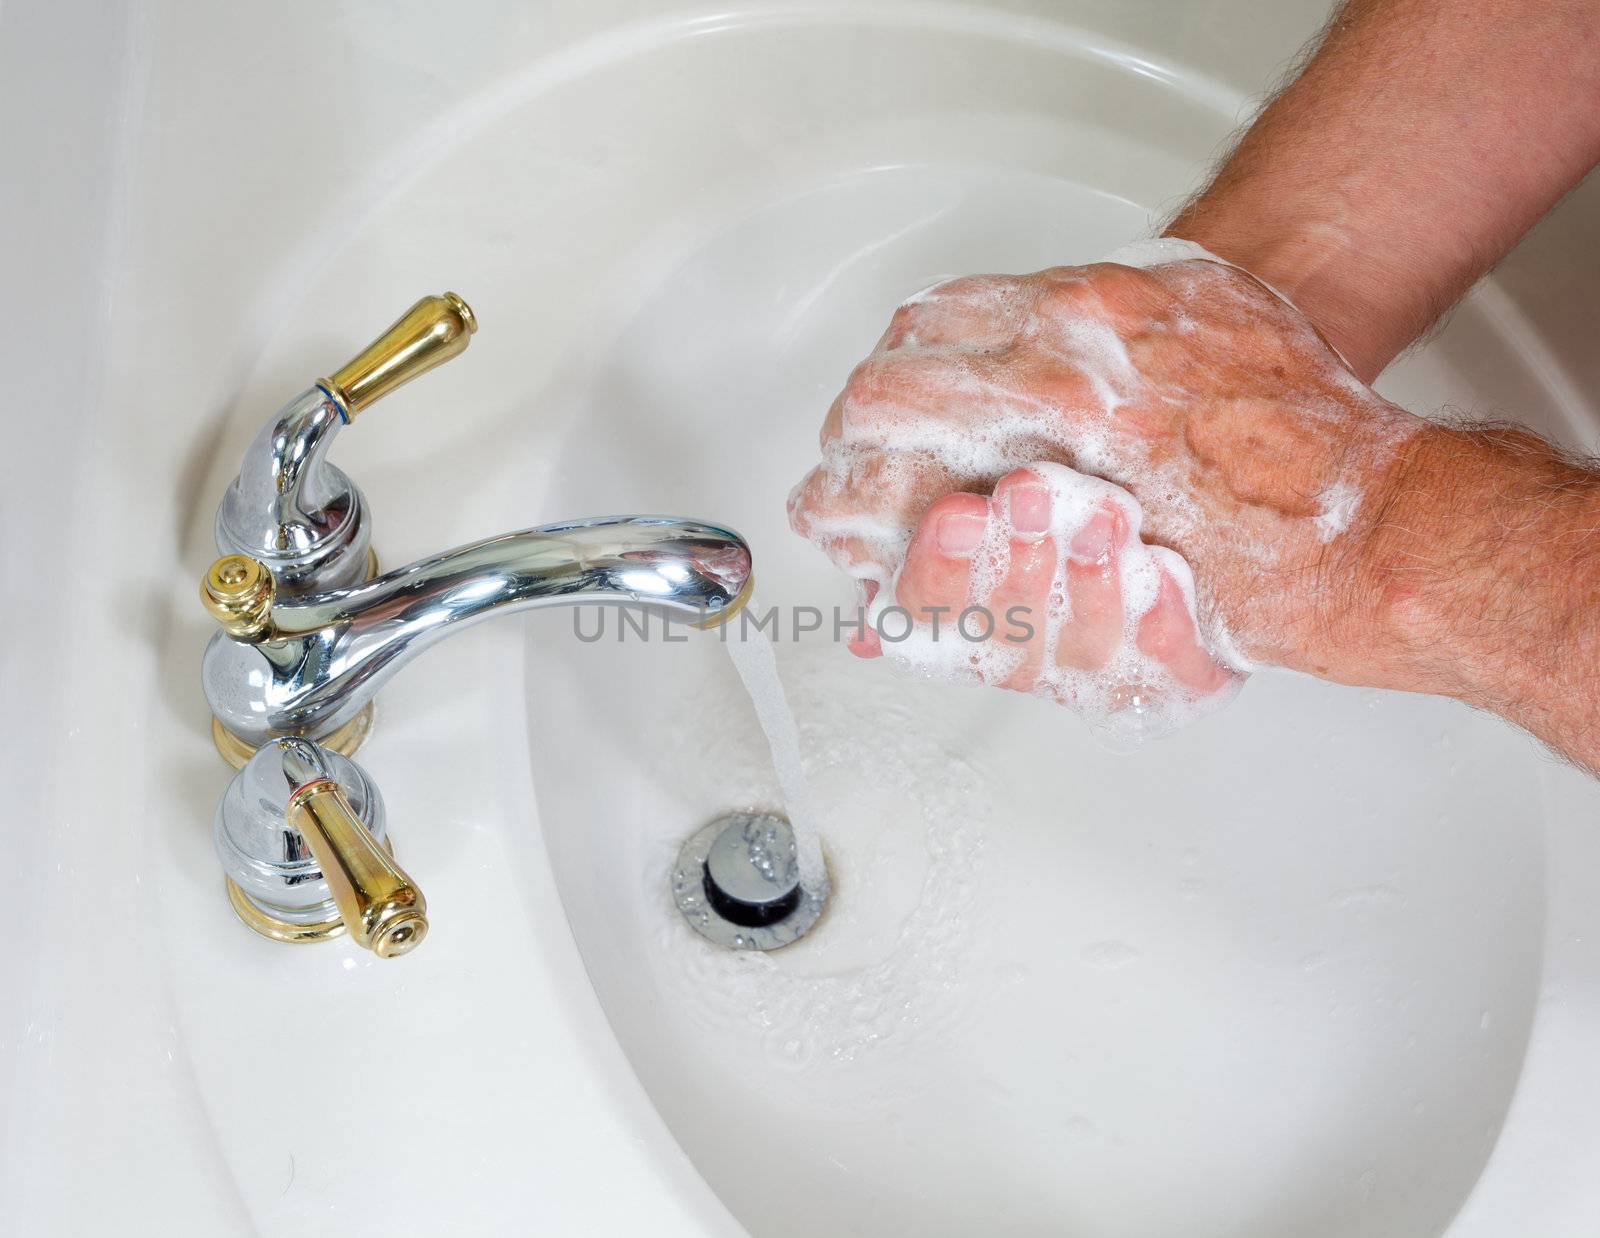 Senior man washing hands in modern sink with soap and lathering suds